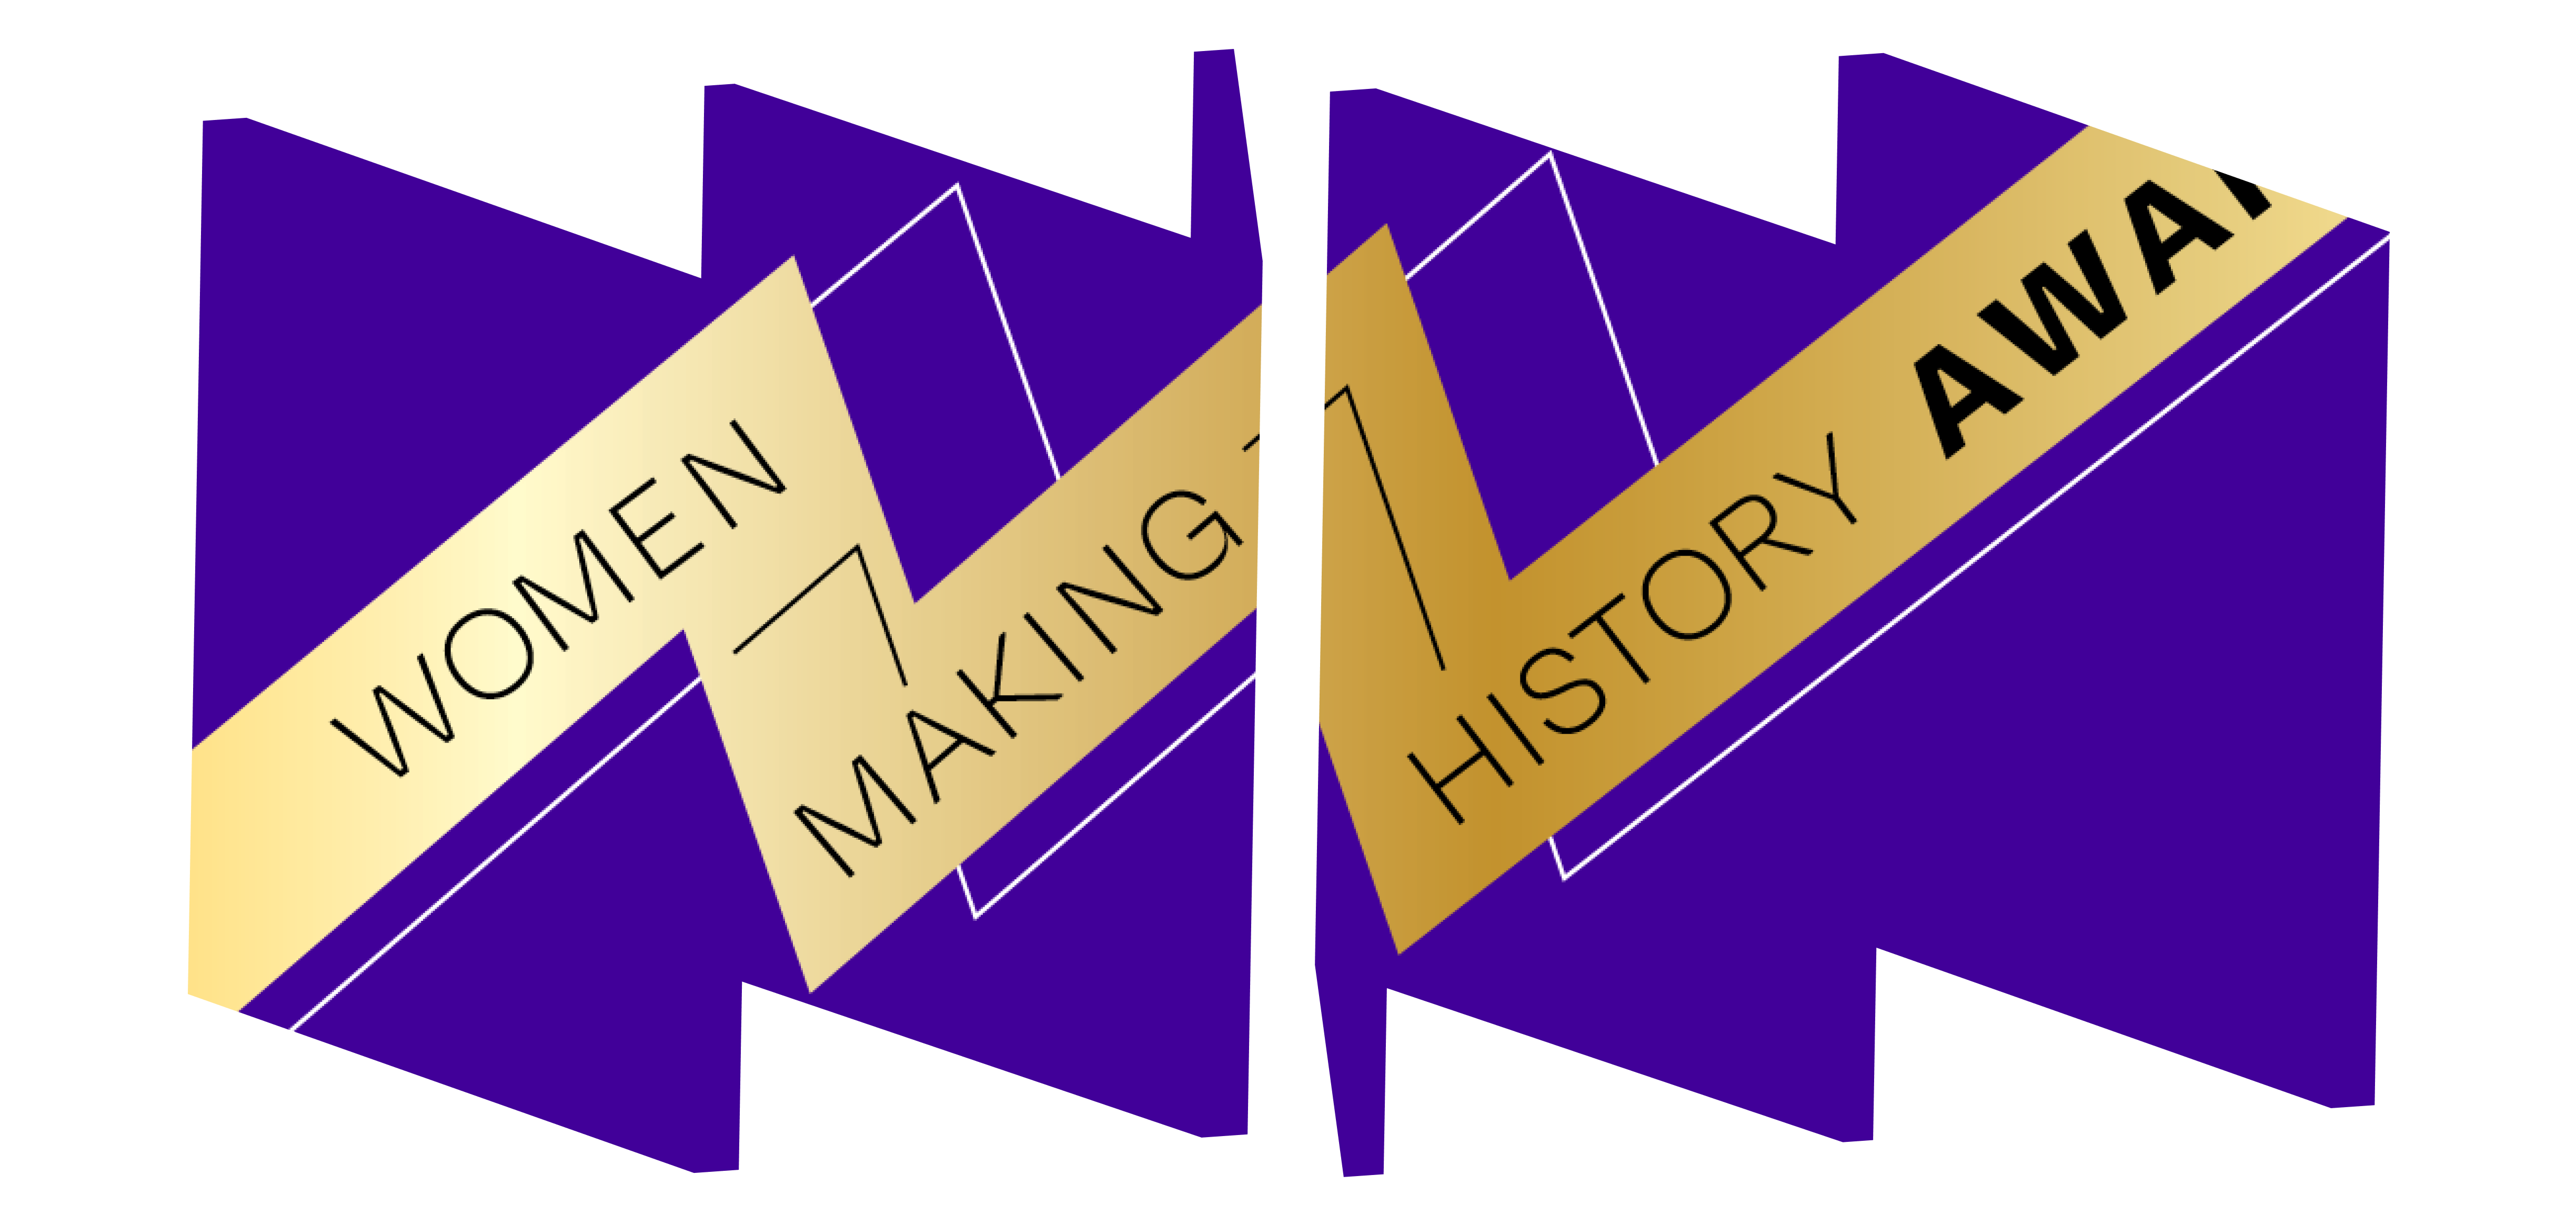 Text says "Women Making History Awards" in gold ribbon across purple background.